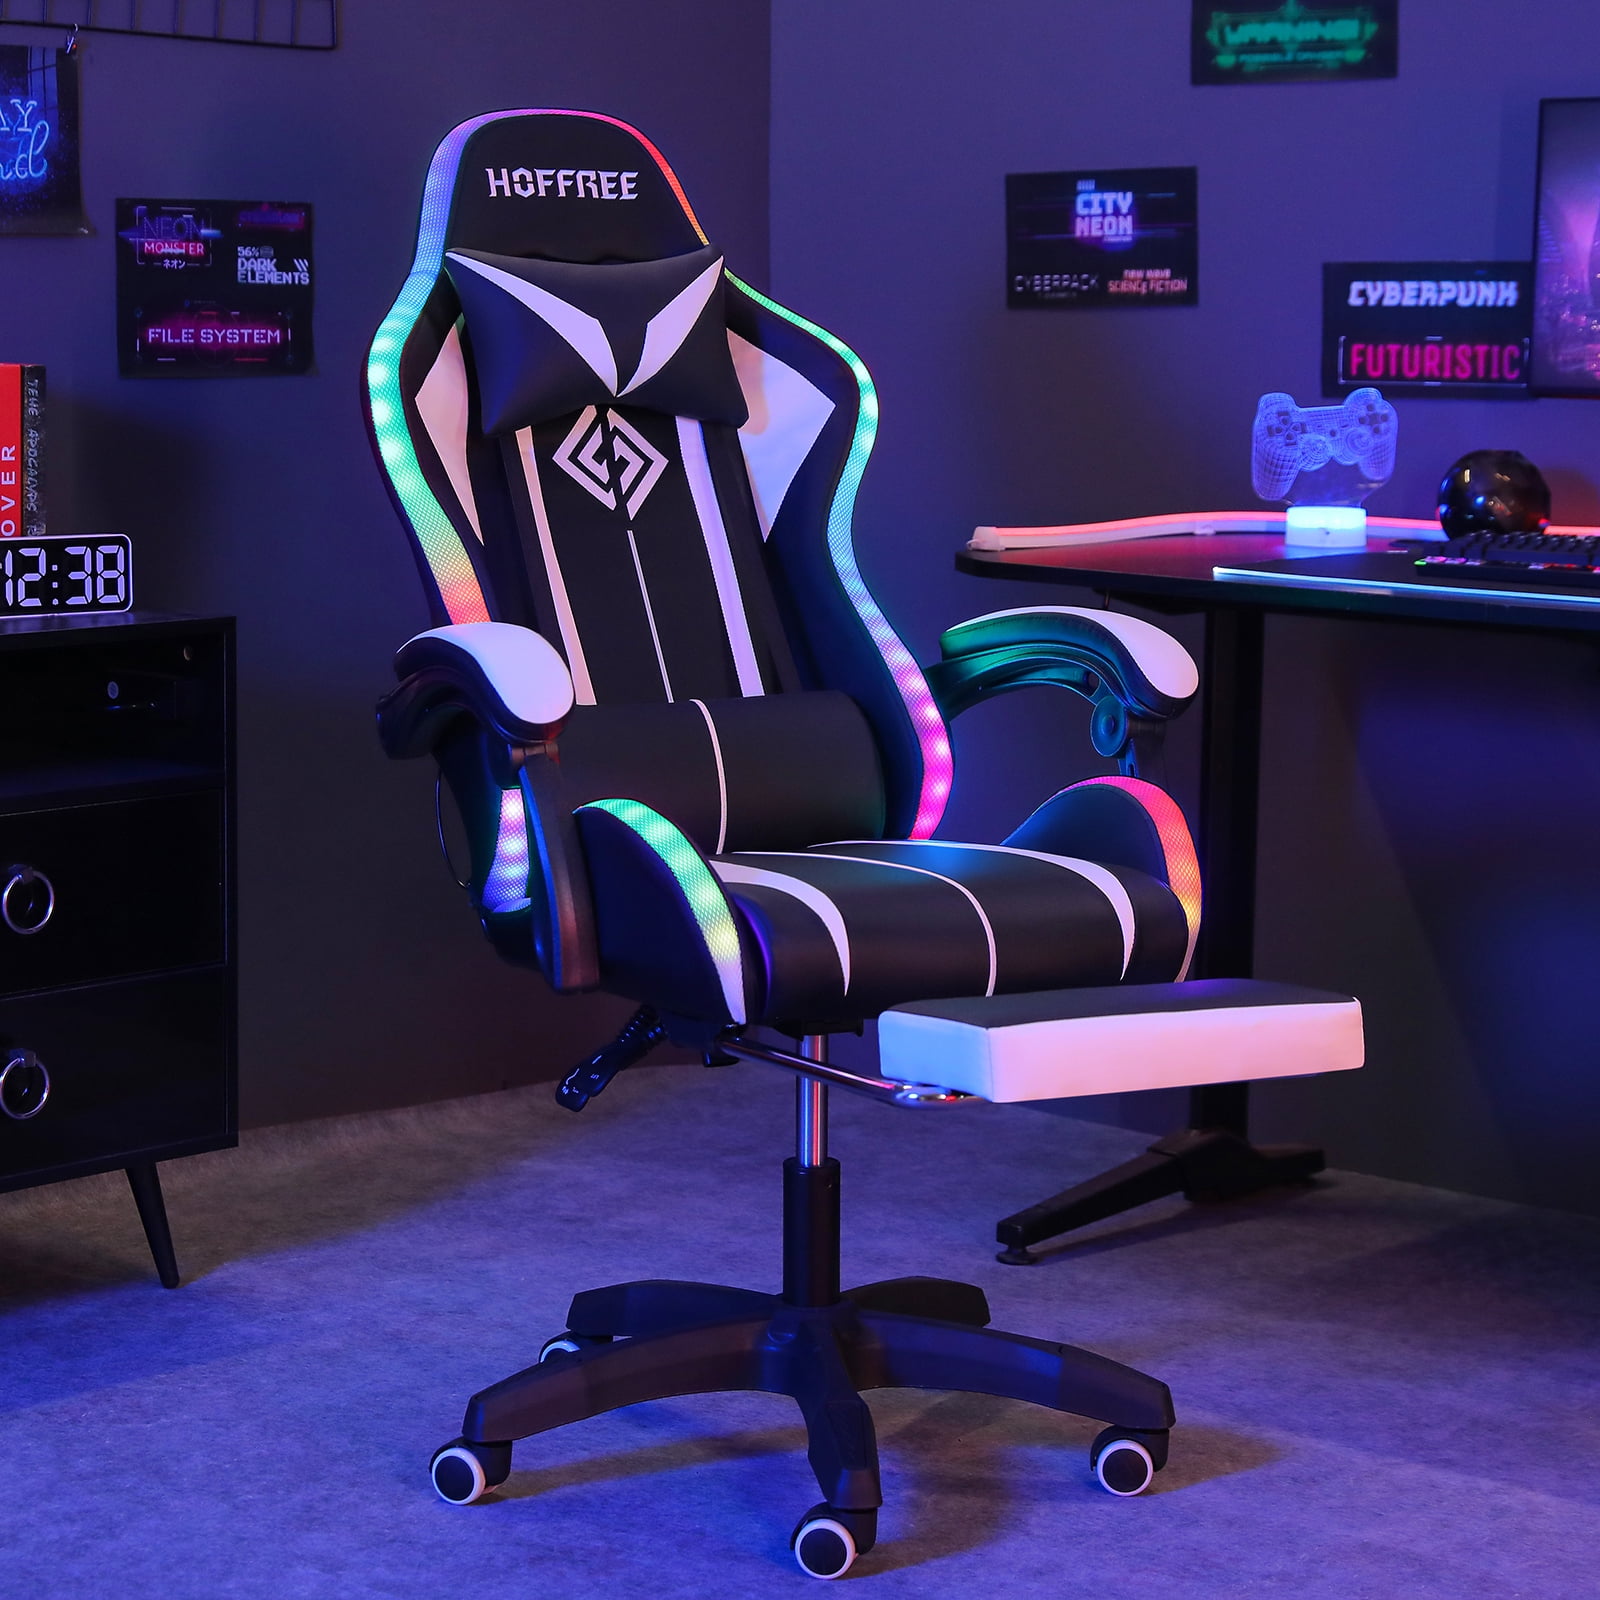 Finally back in the gaming mood. Treated myself to a new chair